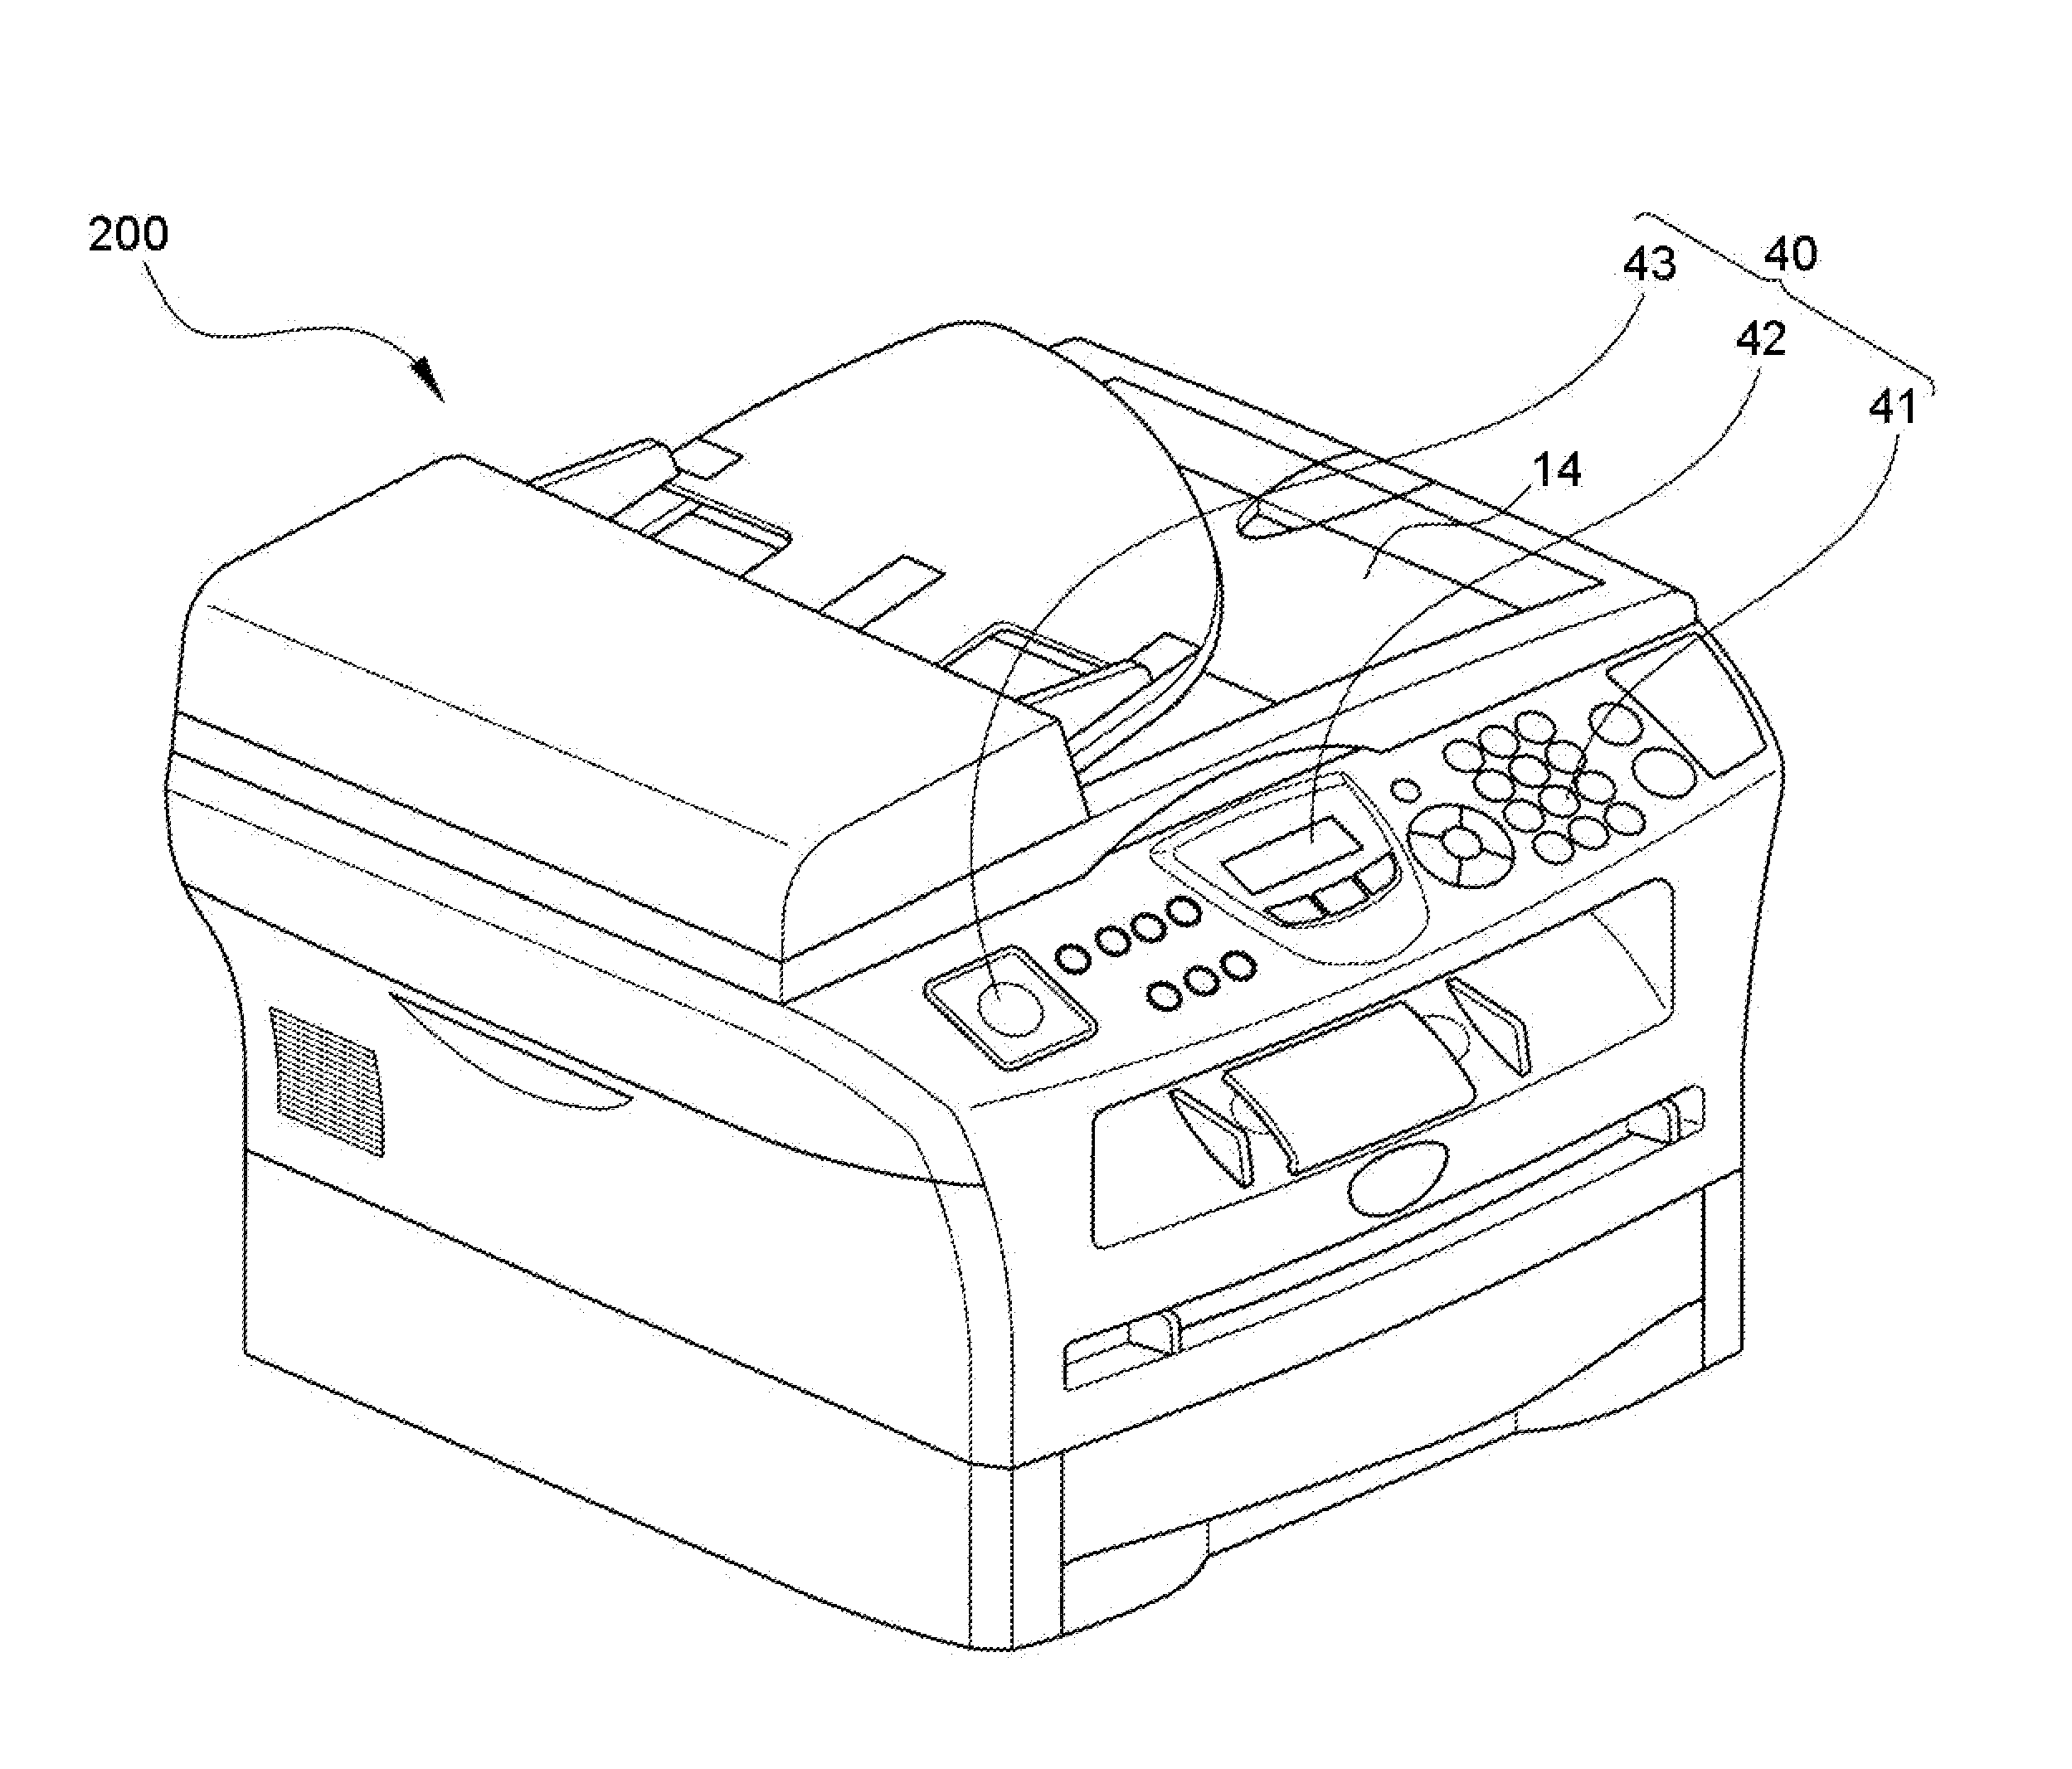 Image processing systems, data processing apparatuses, and computer-readable media storing instructions for data processing apparatuses